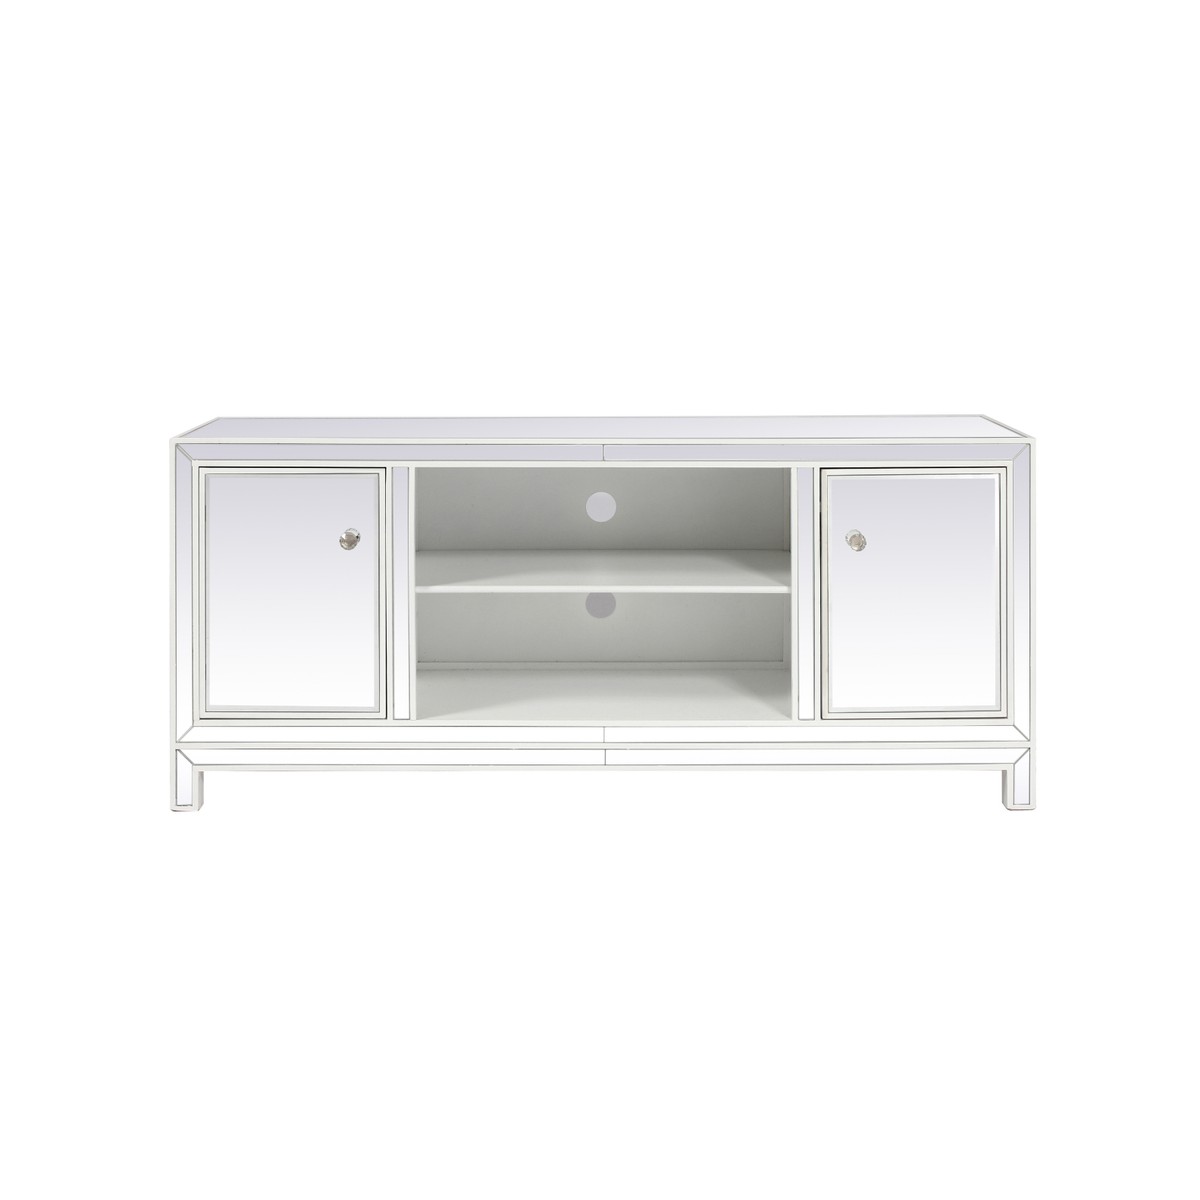 ELEGANT FURNITURE LIGHTING MF701WH REFLEXION 60 INCH MIRRORED TV STAND IN WHITE